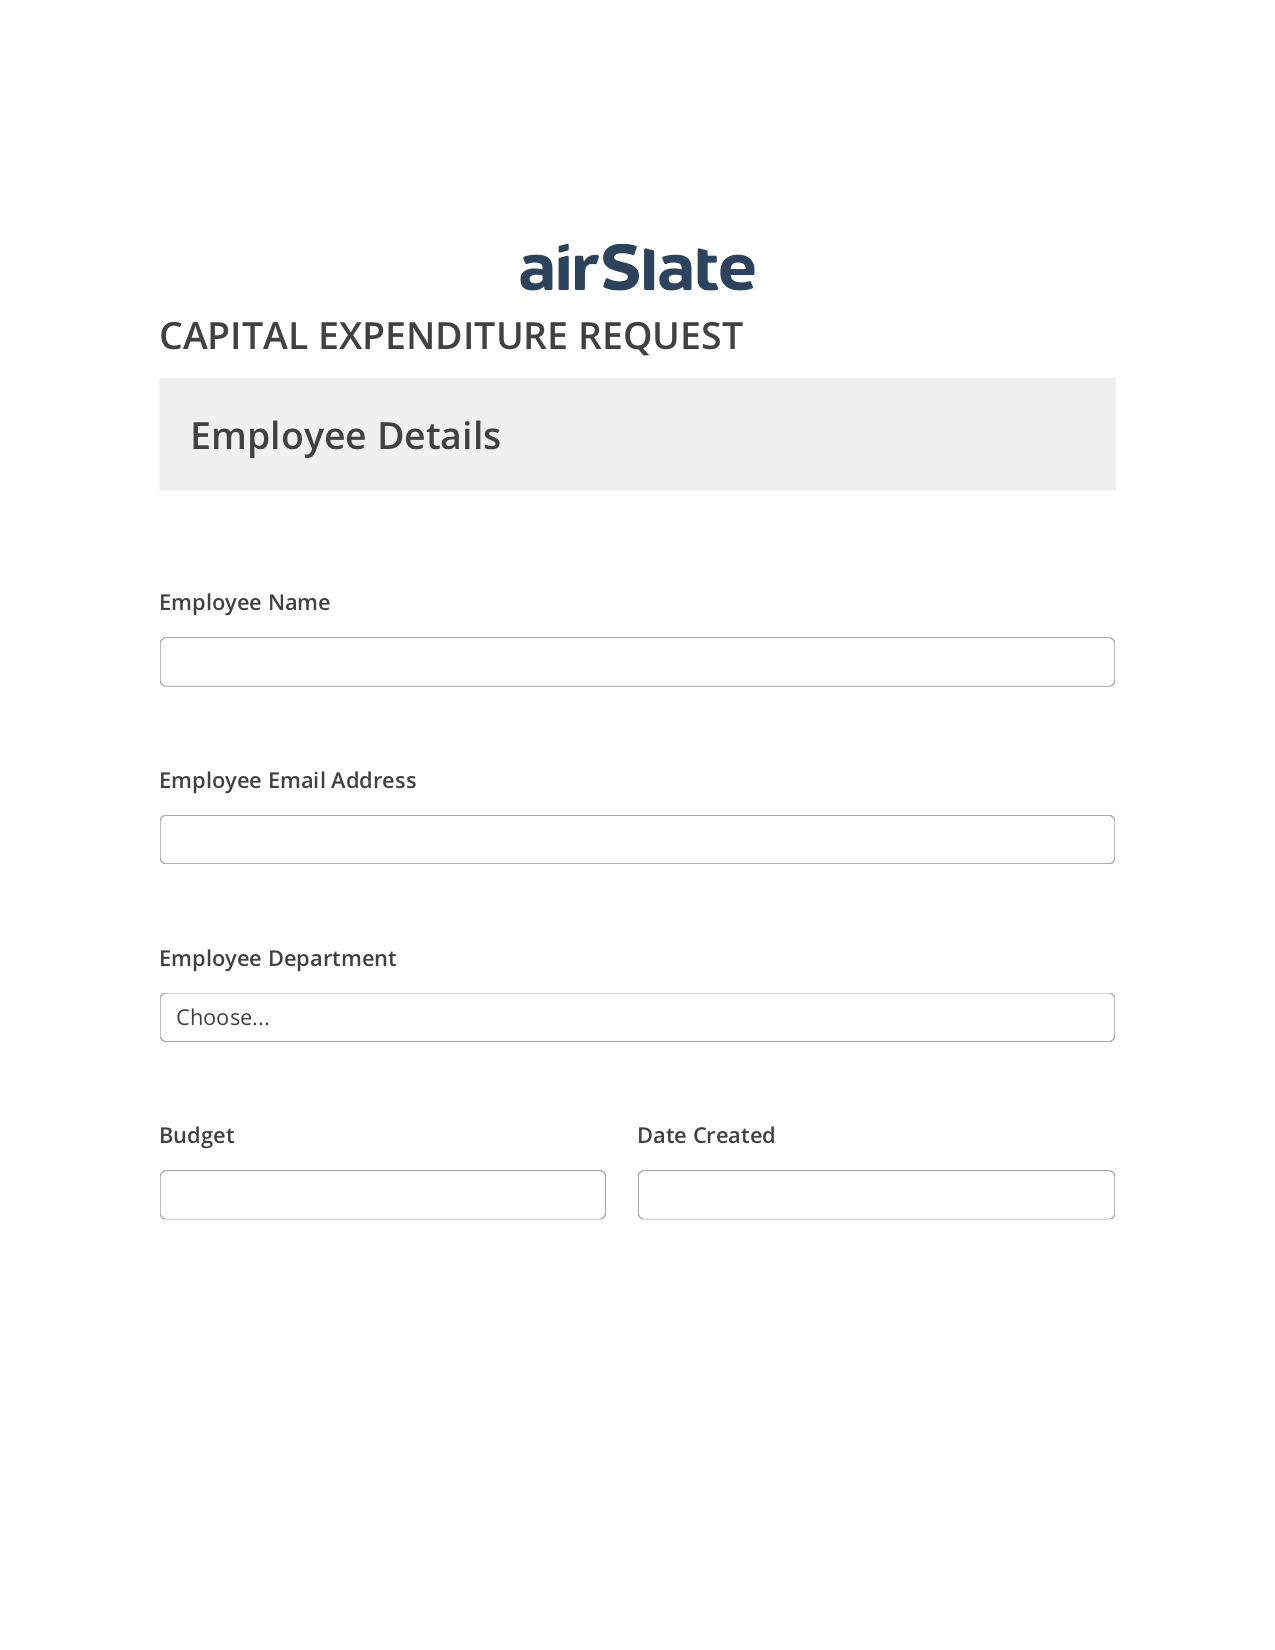 Capital Expenditure Request Approval Workflow Pre-fill Slate from MS Dynamics 365 record, Revoke Access Bot, Export to NetSuite Bot